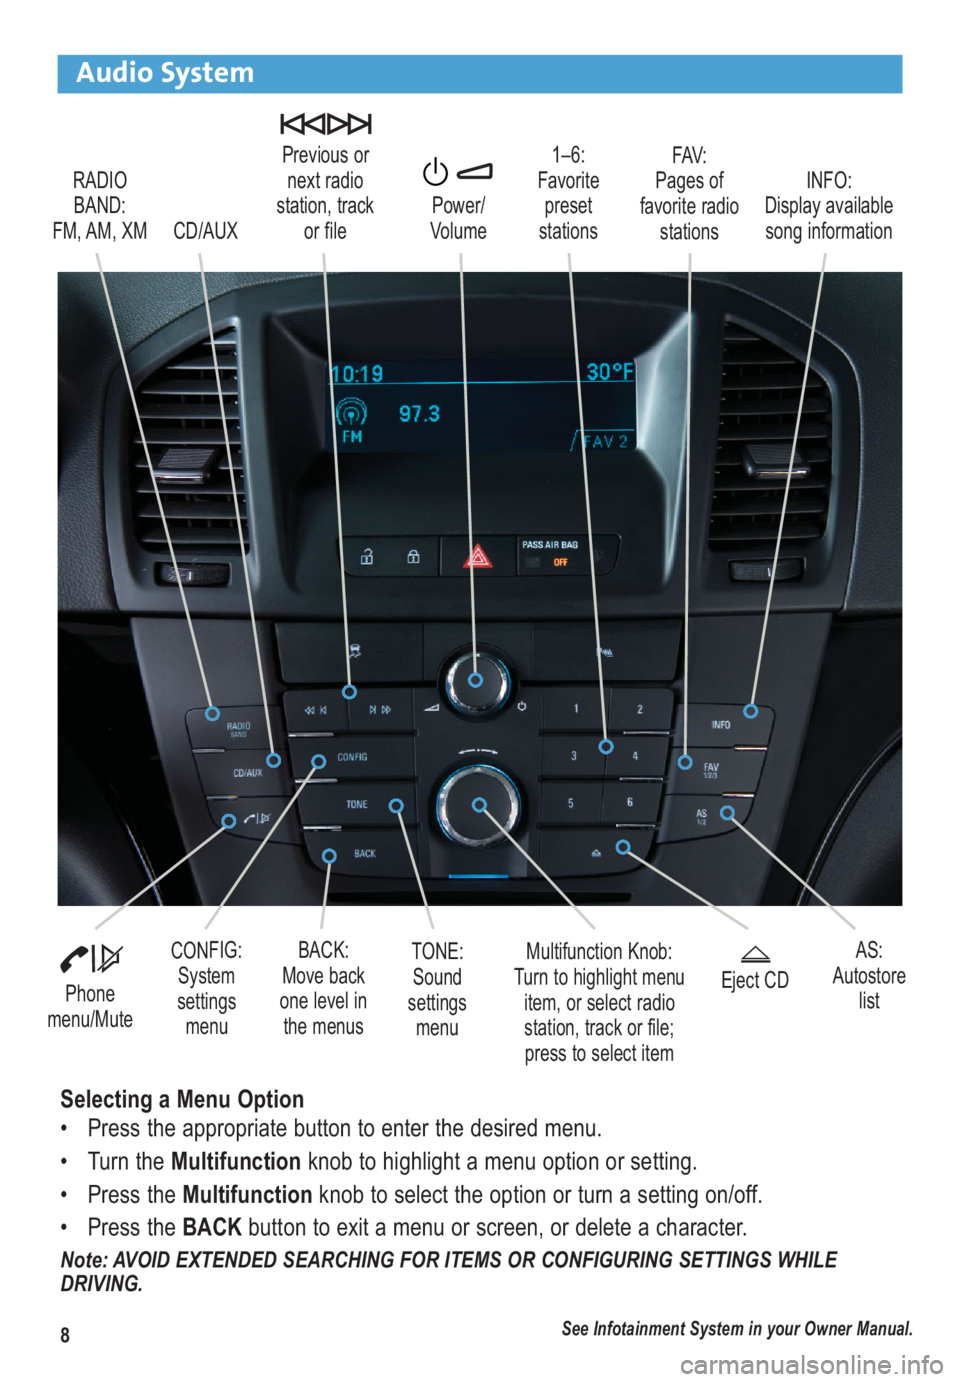 BUICK REGAL 2012  Get To Know Guide 8
Audio System
RADIO
BAND: 
FM, AM, XM1–6: 
Favorite
preset
stationsFAV:
Pages of
favorite radio
stations Previous or
next radio
station, track 
or file
CD/AUXPower/
VolumeINFO: 
Display available
s